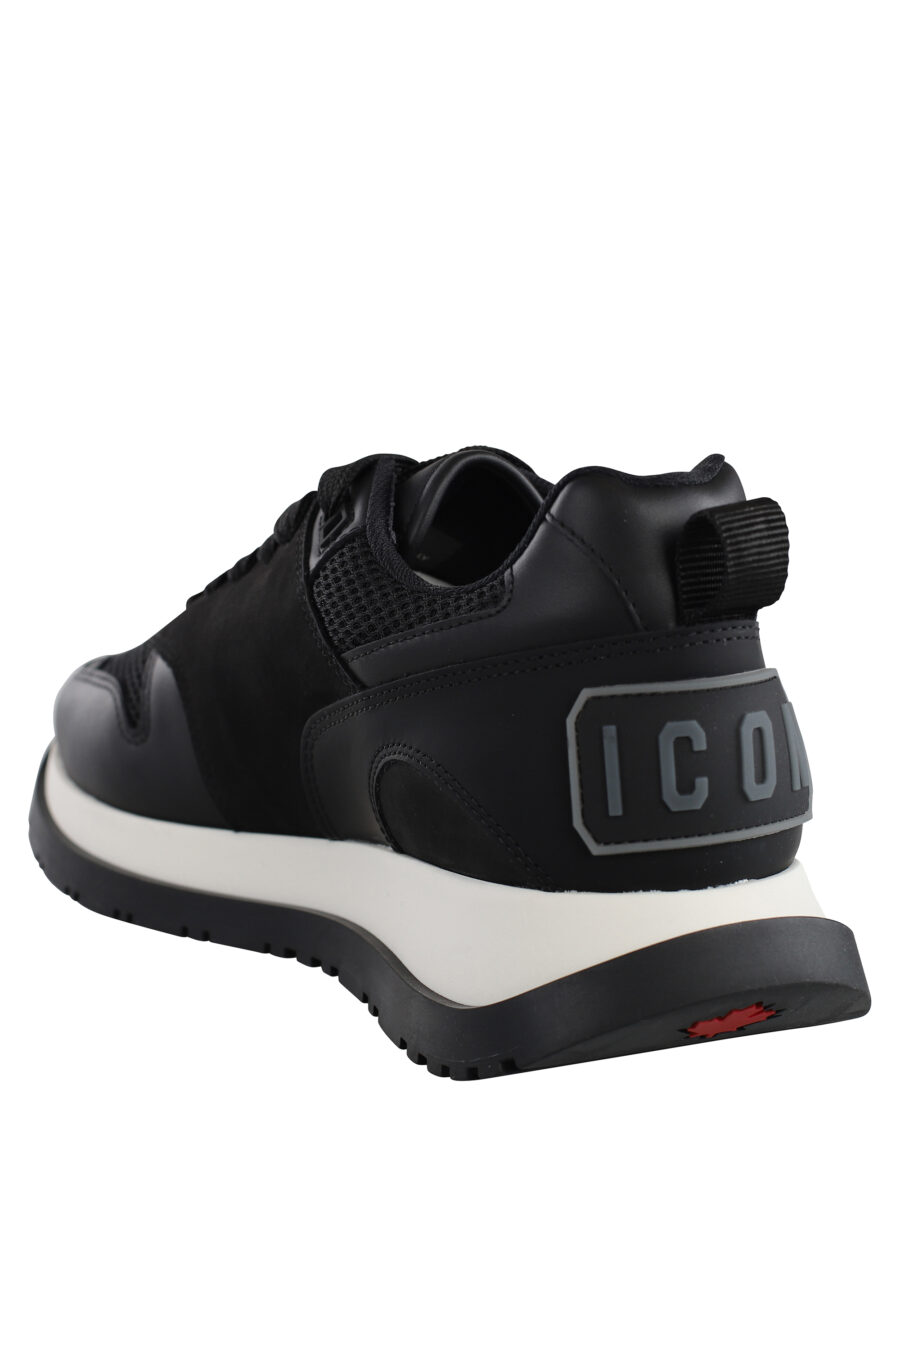 Black trainers with logo on sole - IMG 7162